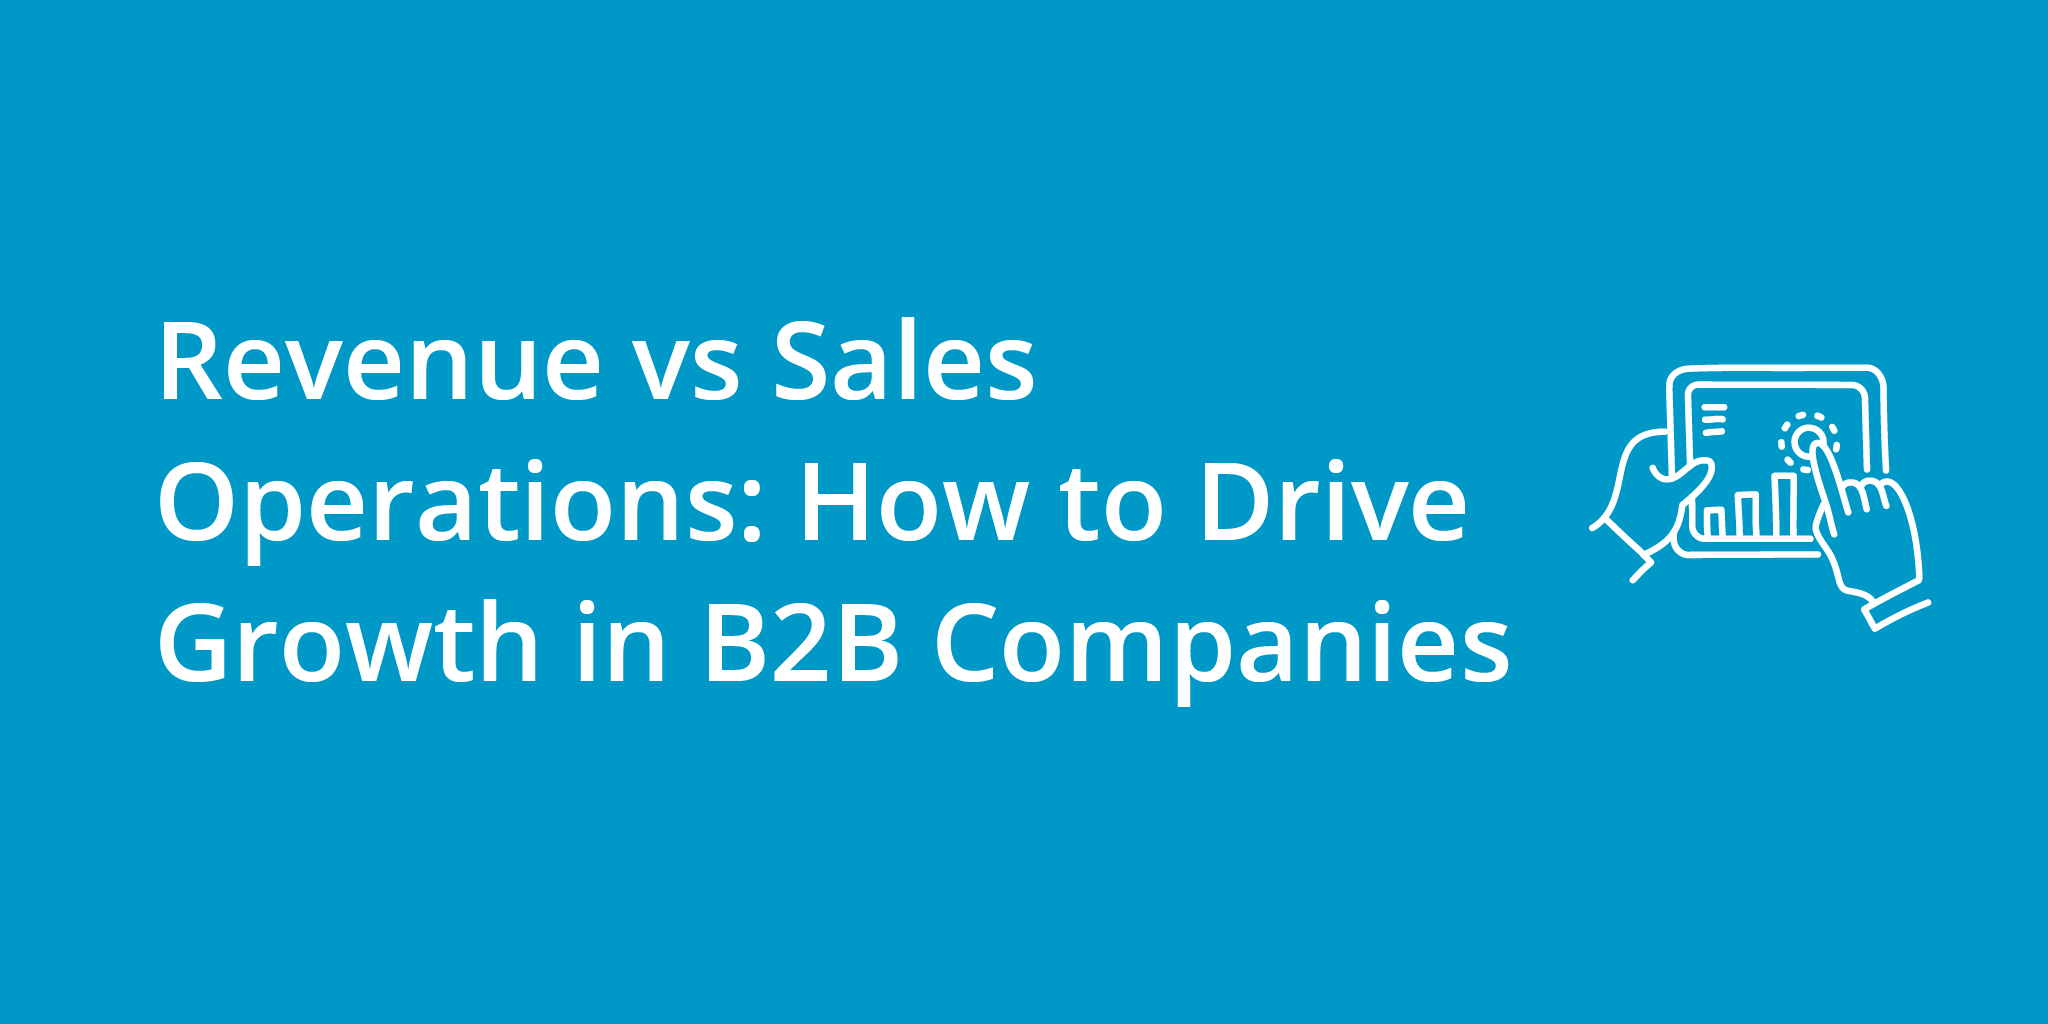 Revenue vs Sales Operations: How to Drive Growth in B2B Companies